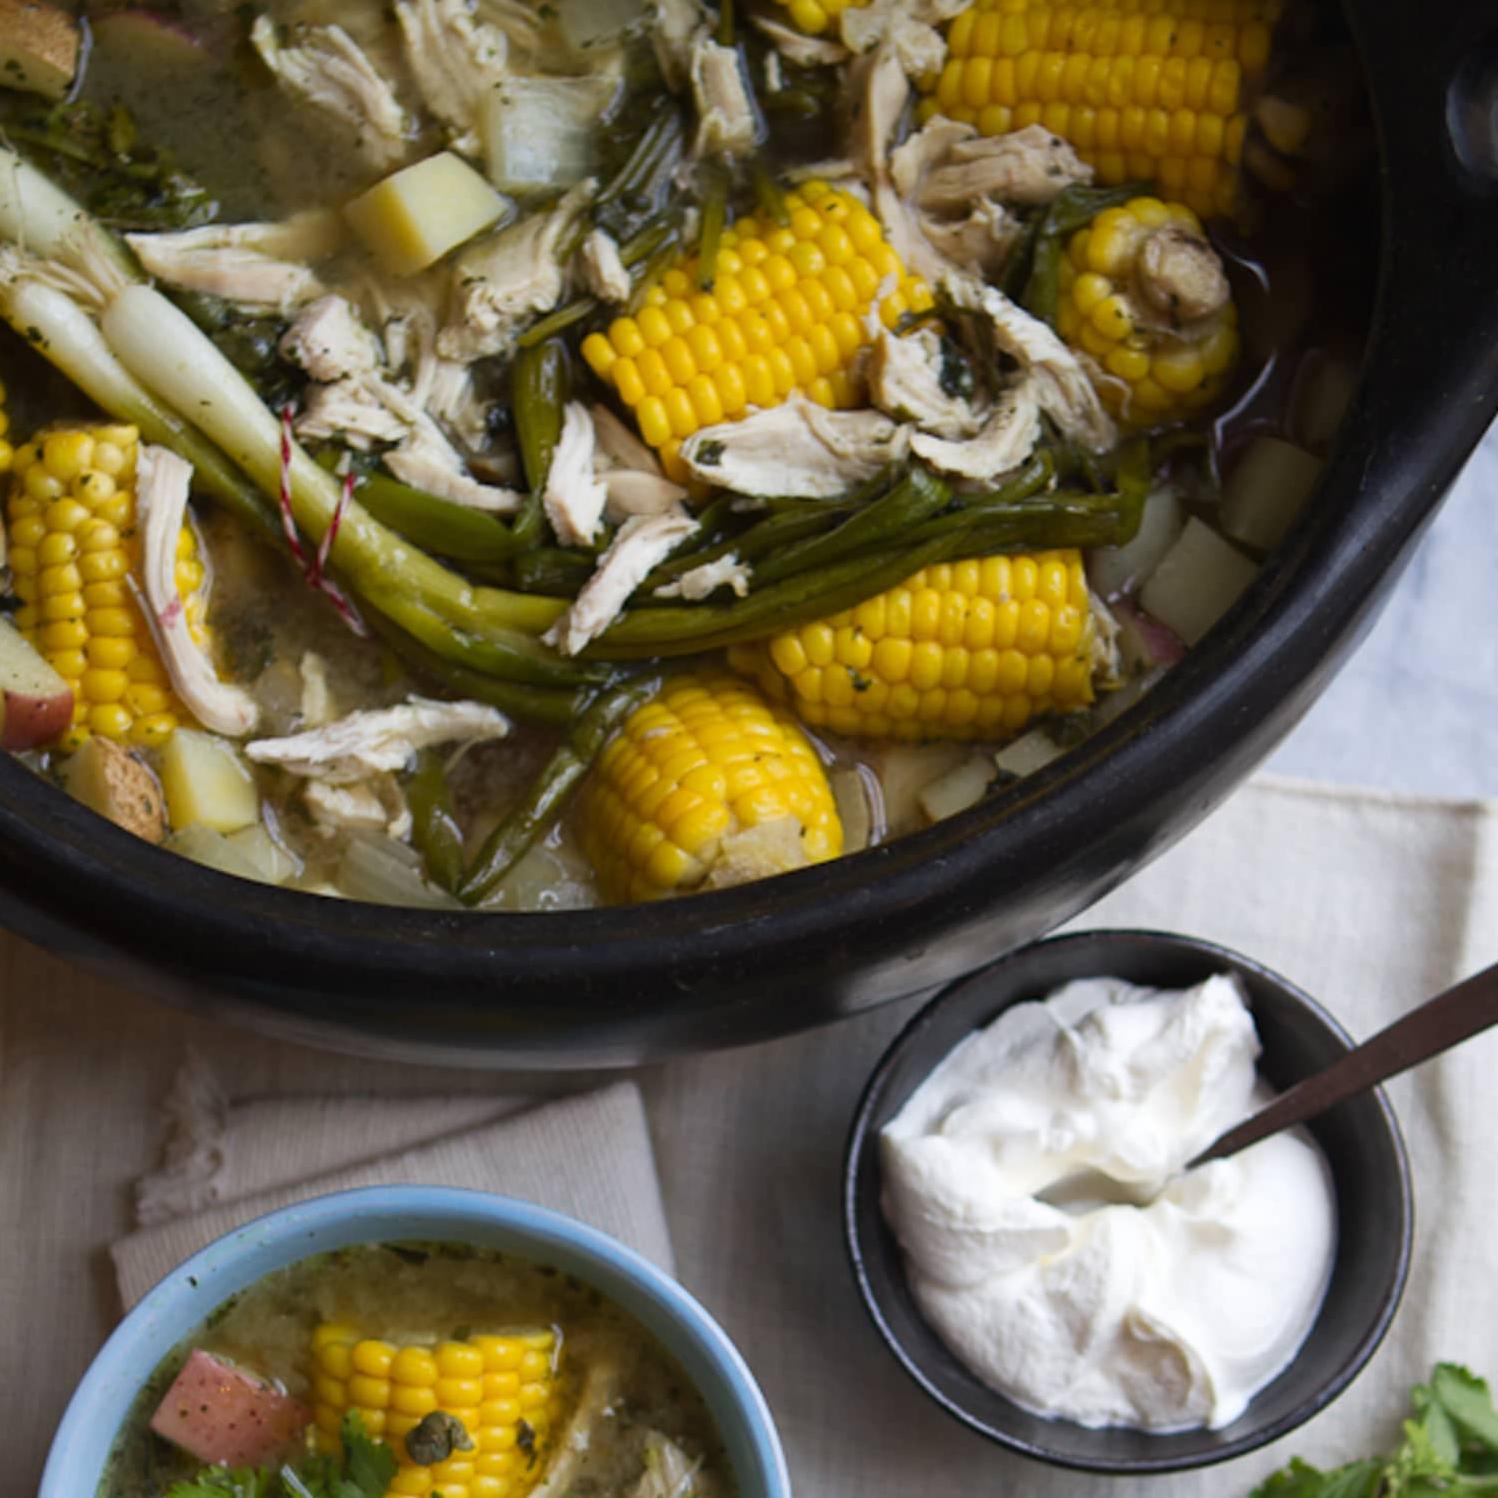  Sweet corn, creamy potatoes, tender chicken... all in one delicious dish